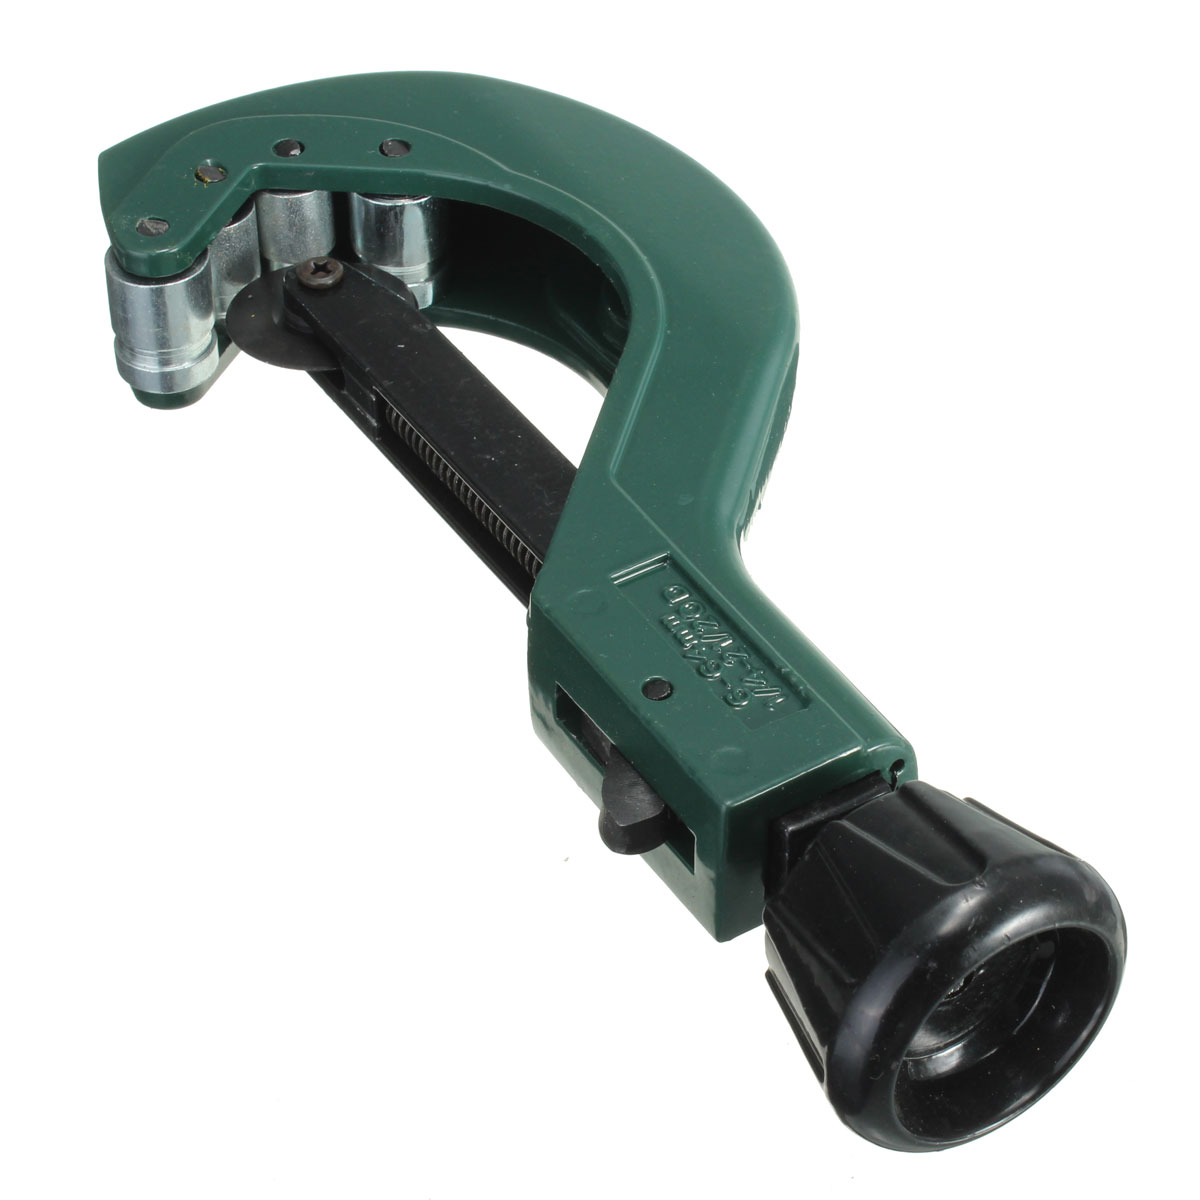 6-64mm-Heavy-Duty-Silverline-Plumbers-Quick-Release-Tube-Pipe-Cutter-Tool-1041481-2